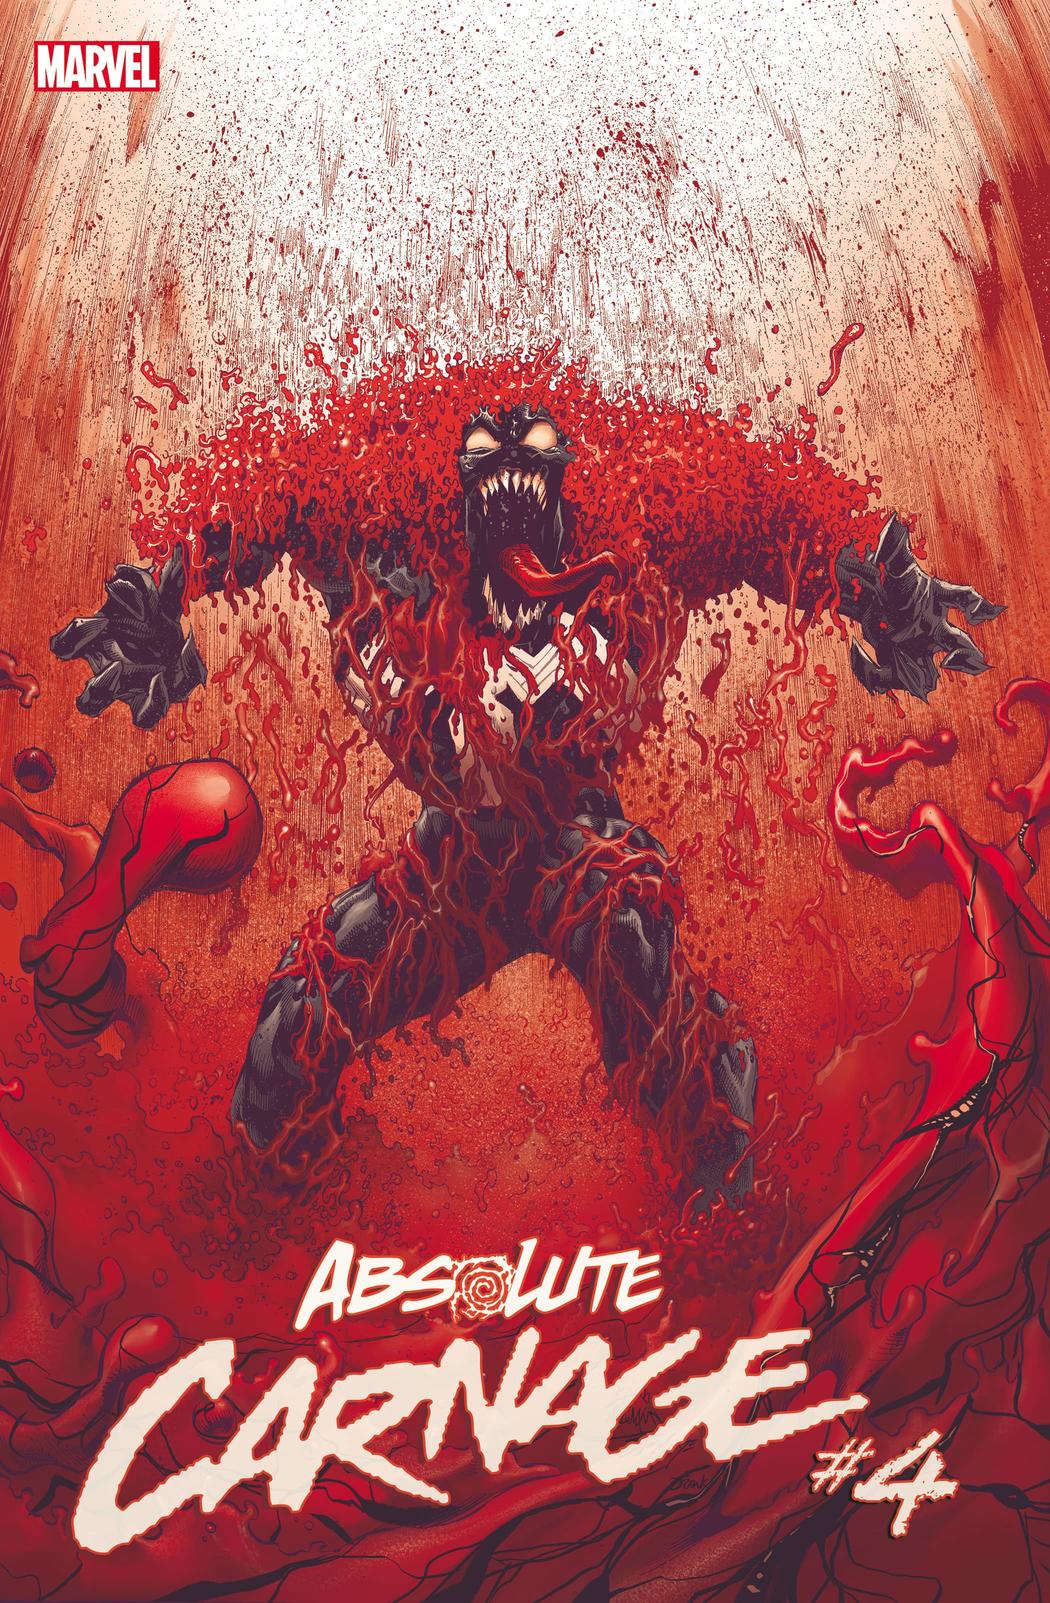 Massive 'Absolute Carnage' Event Extended